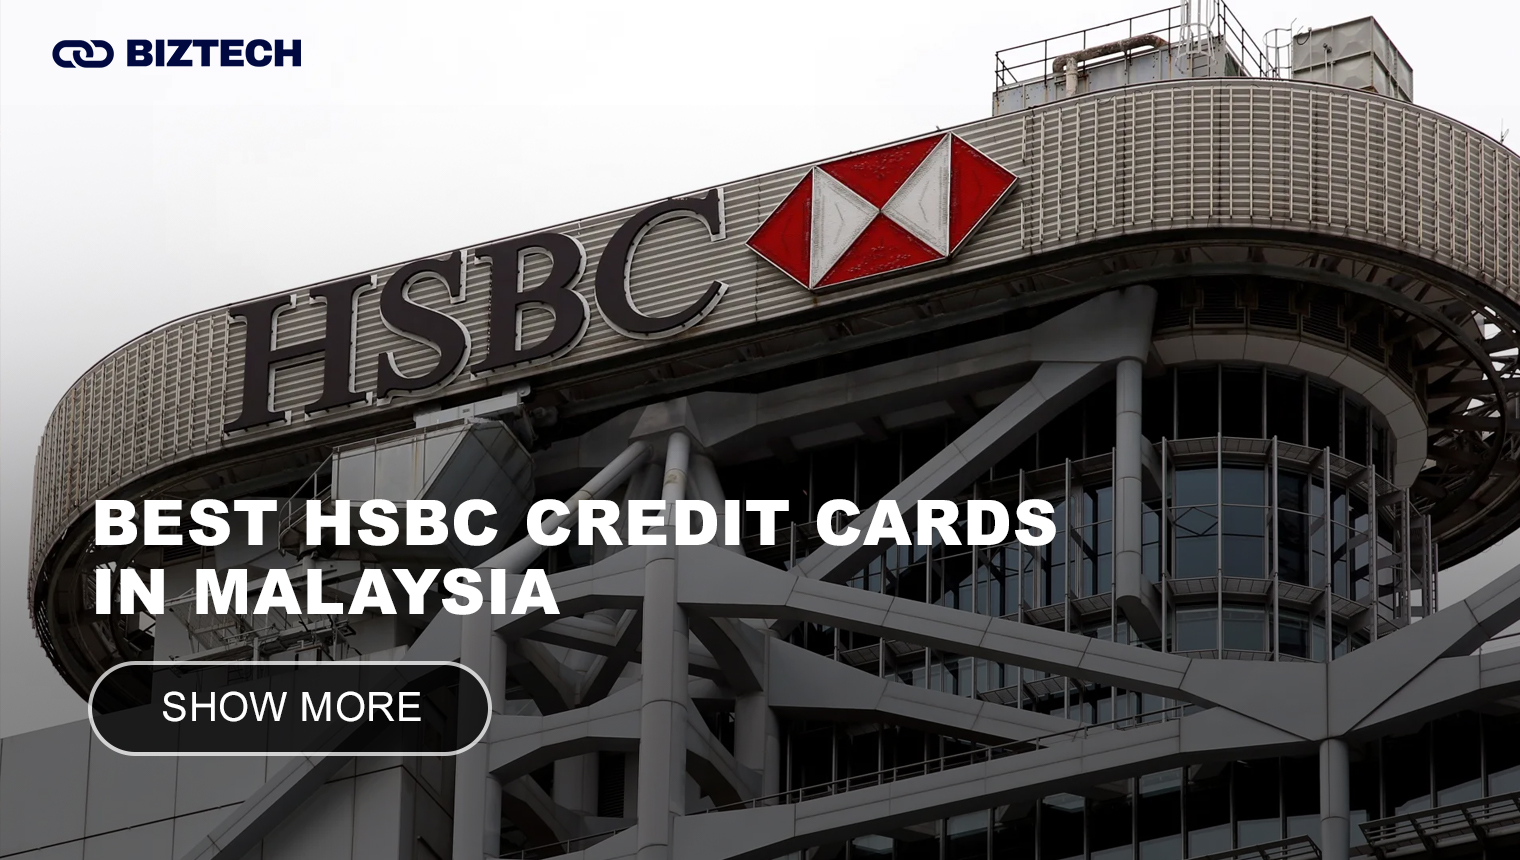 Best HSBC Credit Cards in Malaysia